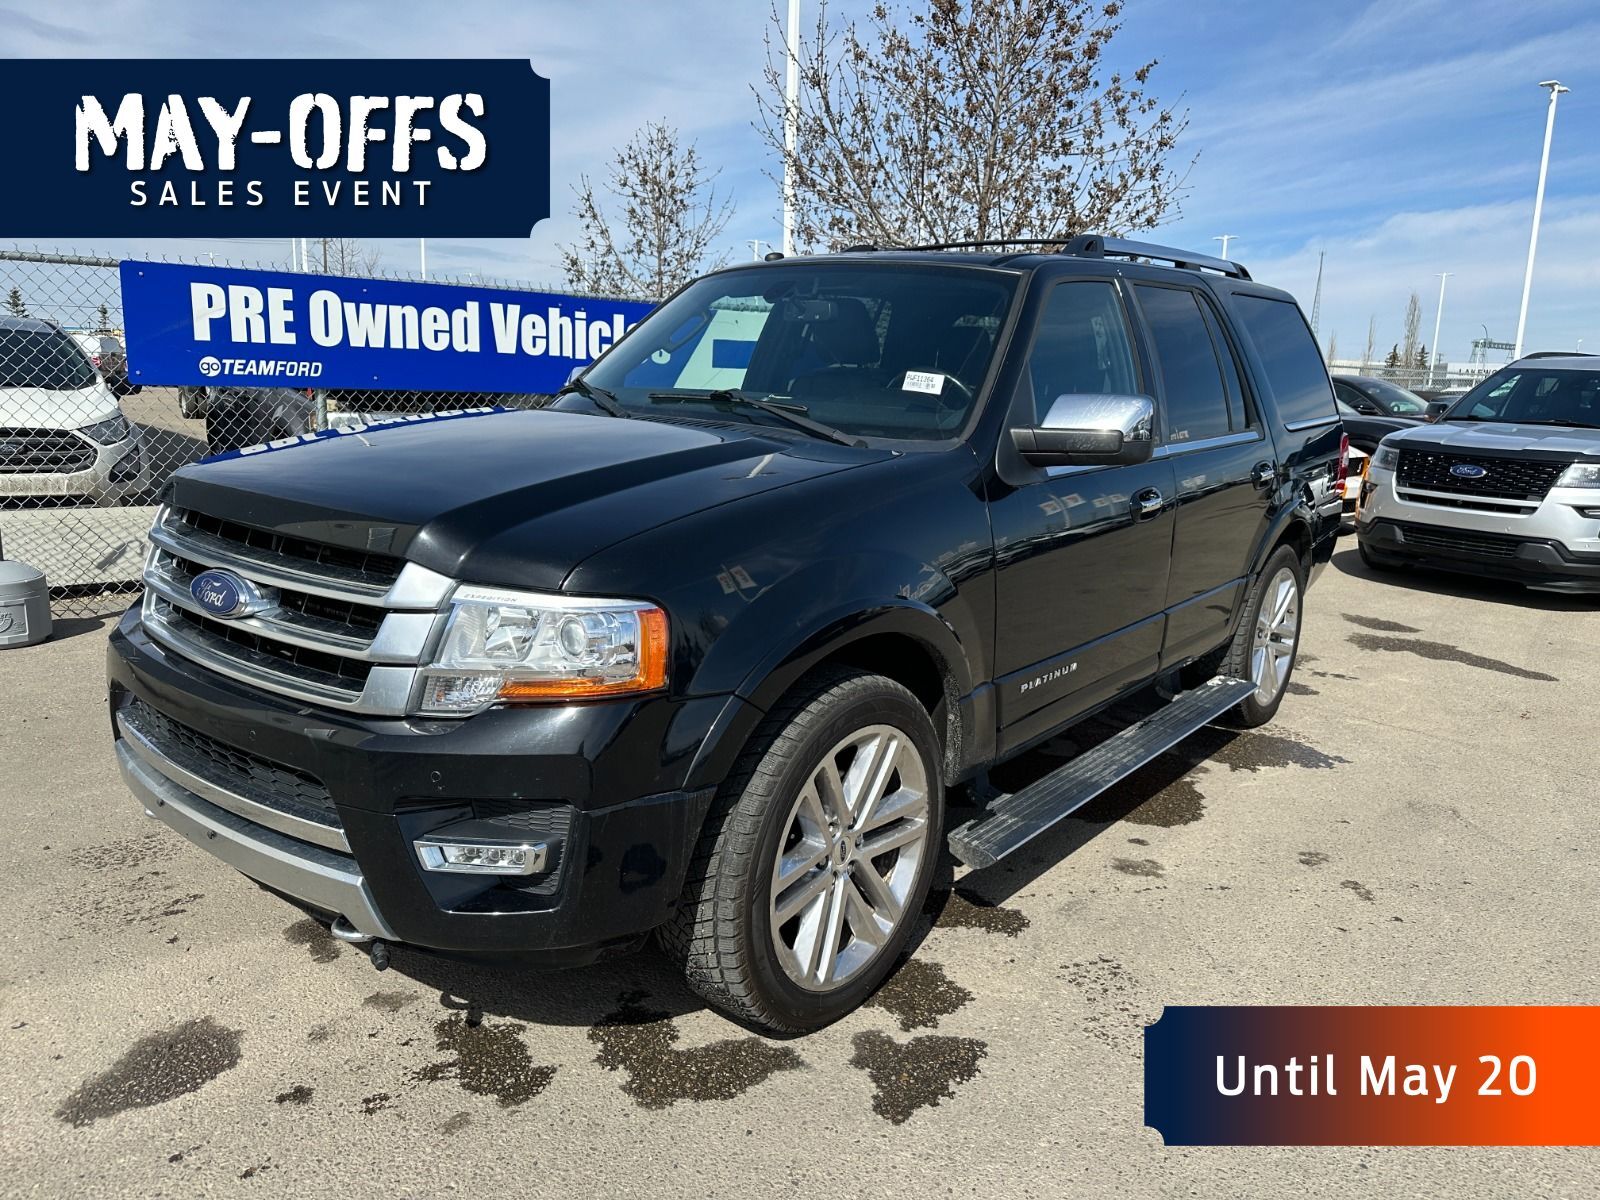 2016 Ford Expedition 3.5L V6 ENG, PLATINUM, TRAILER TOW, REVERSE CAM SY